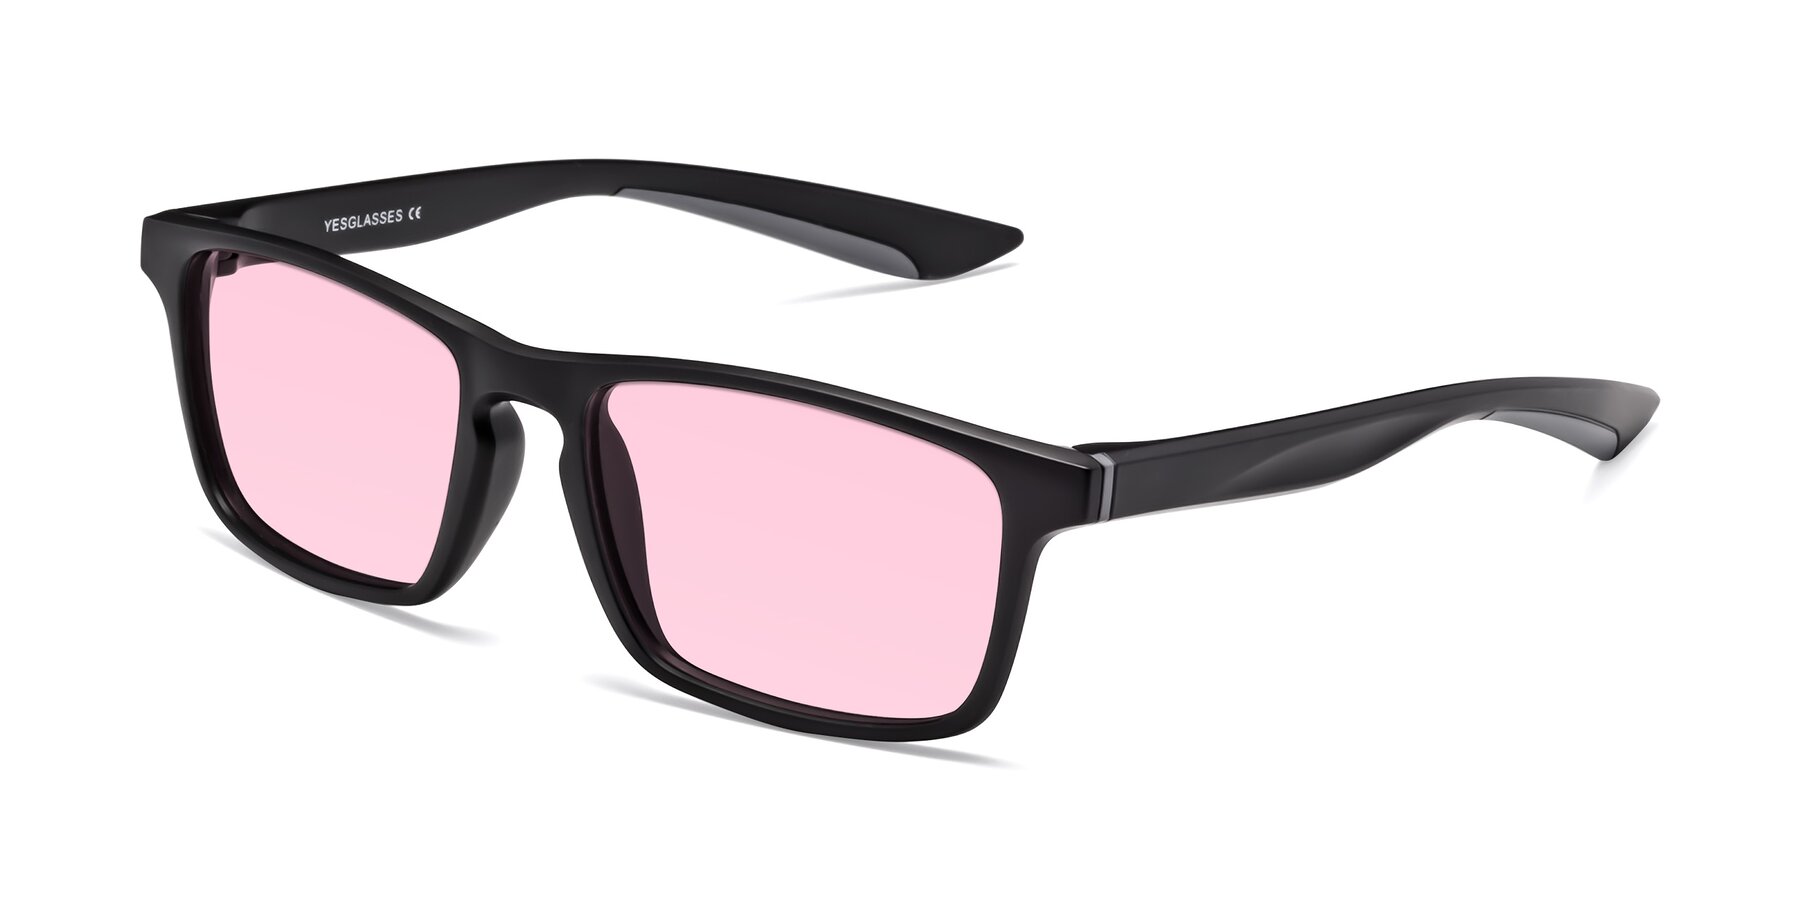 Angle of Passion in Matte Black-Gray with Light Pink Tinted Lenses